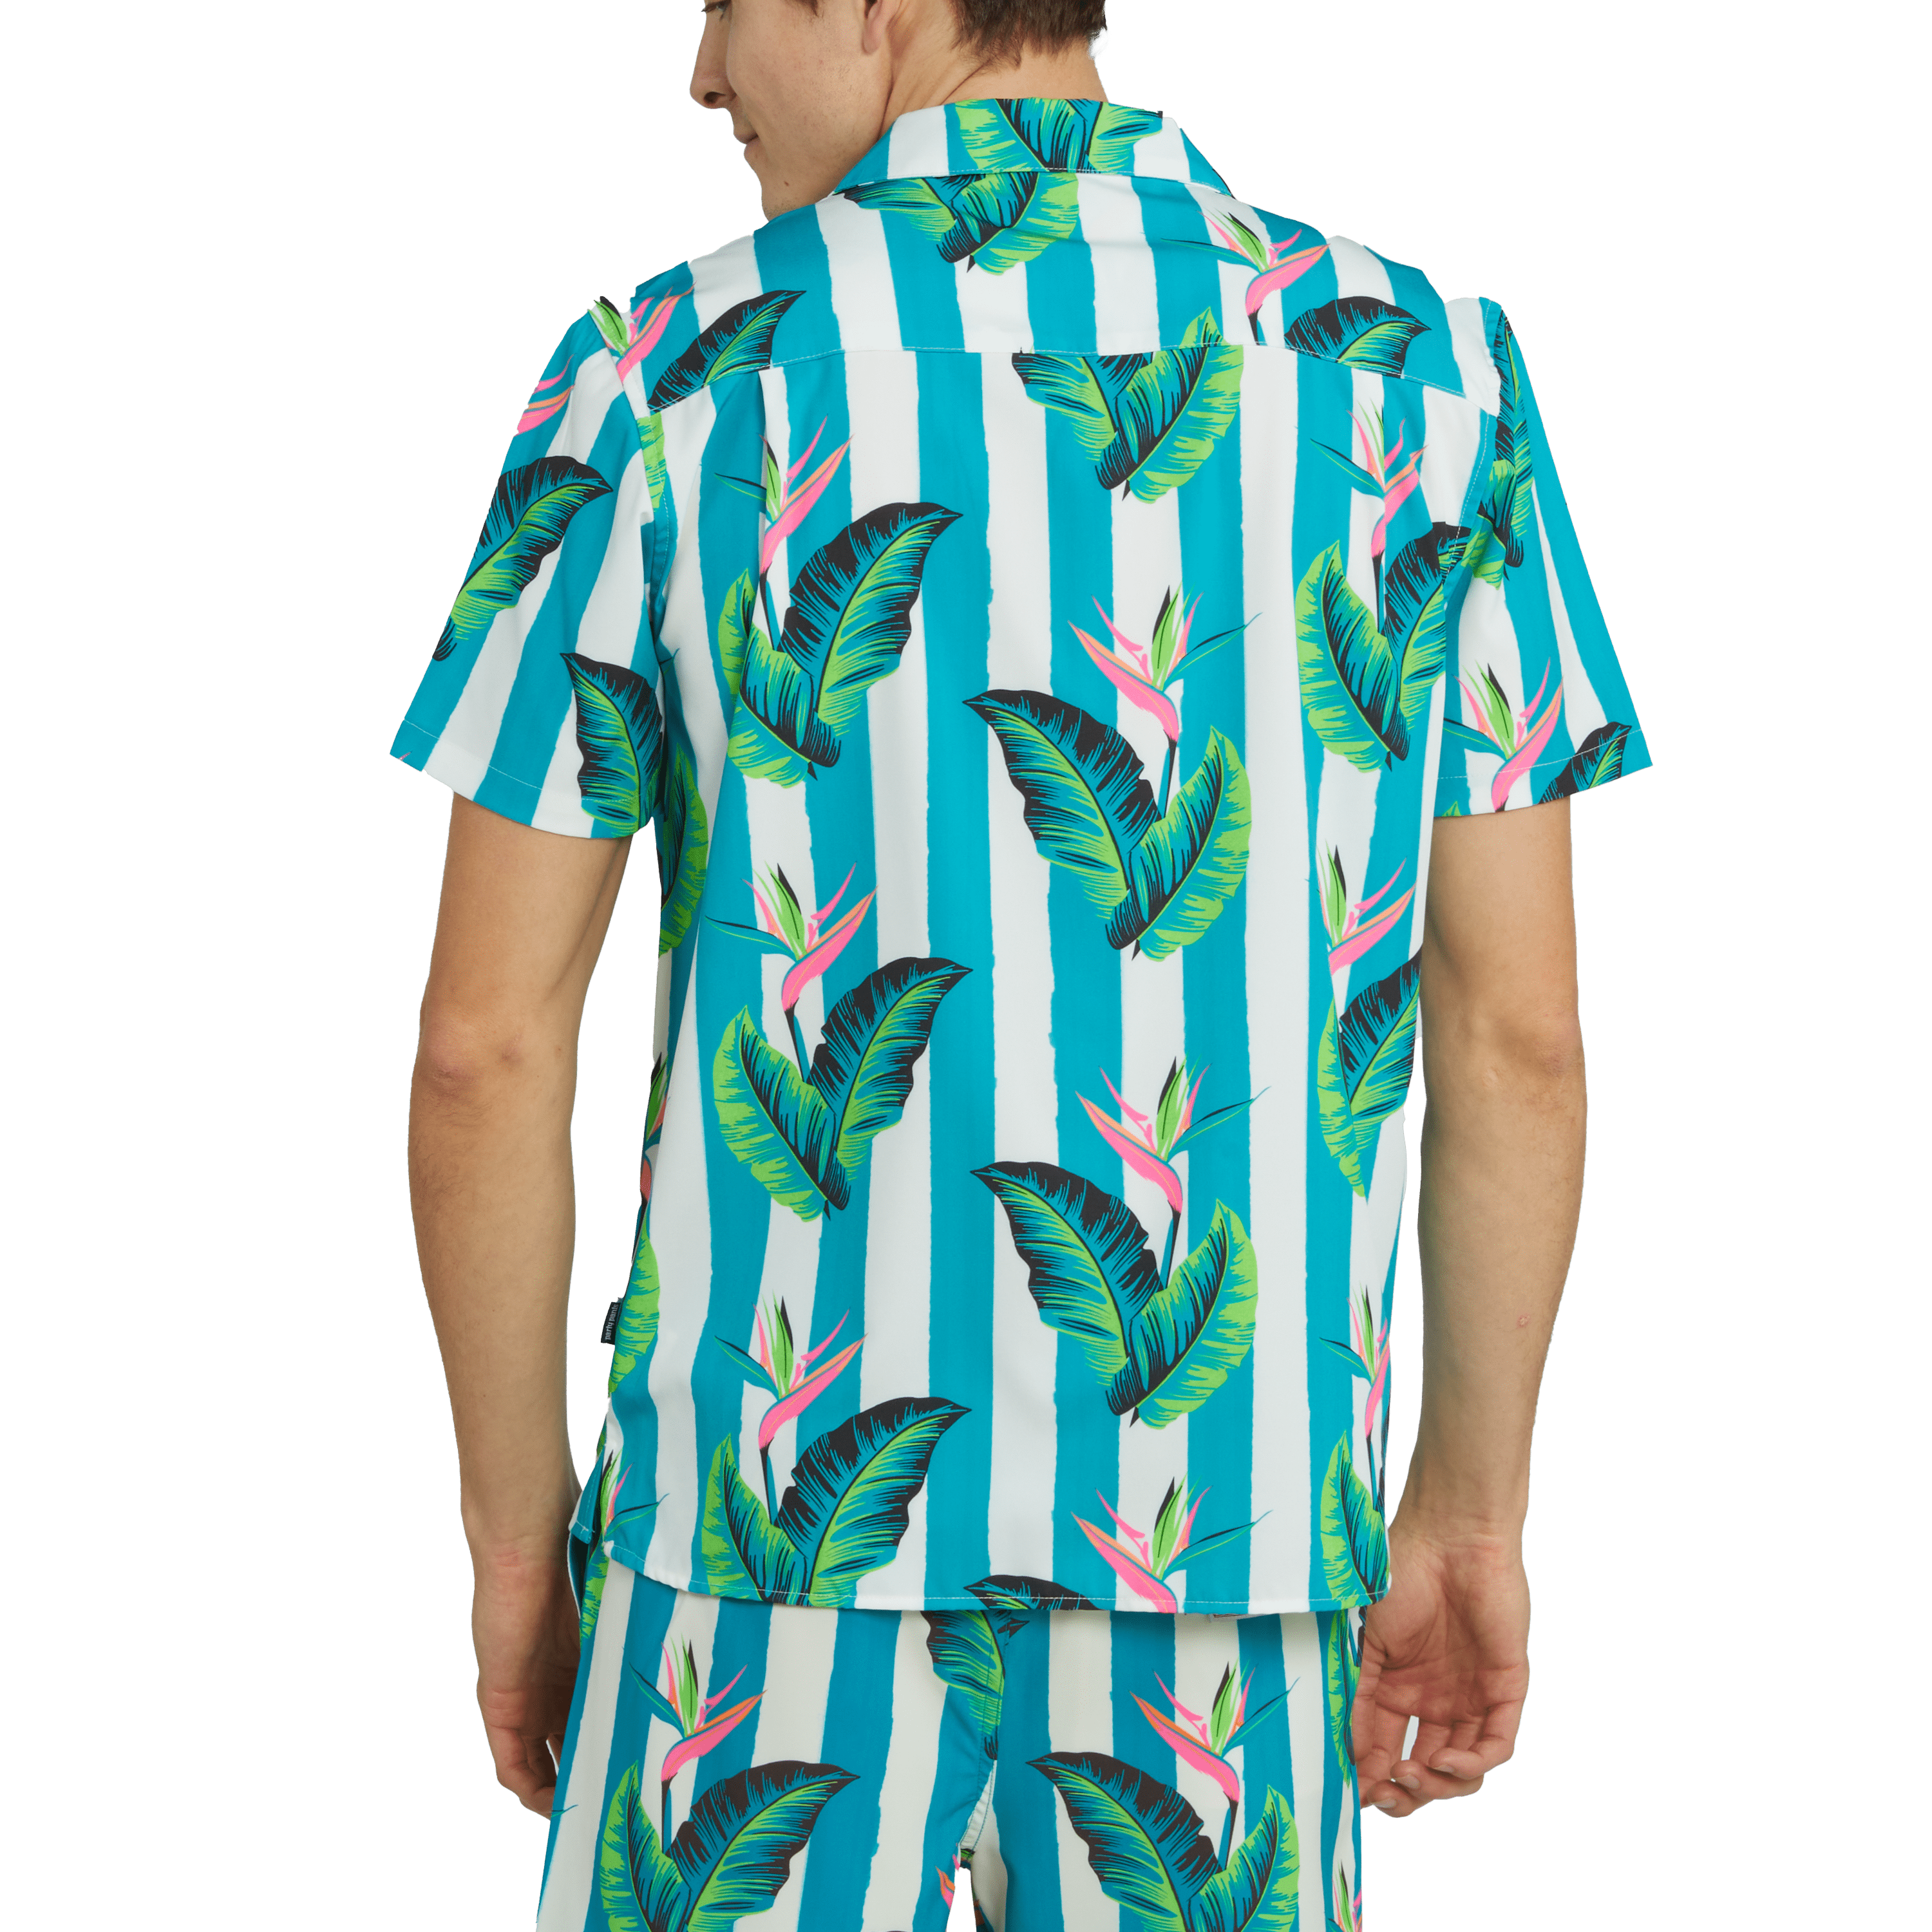 GULF STRIPES PERFORMANCE CABANA SHIRT - TURQUOISE PERFORMANCE WOVEN PARTY PANTS 